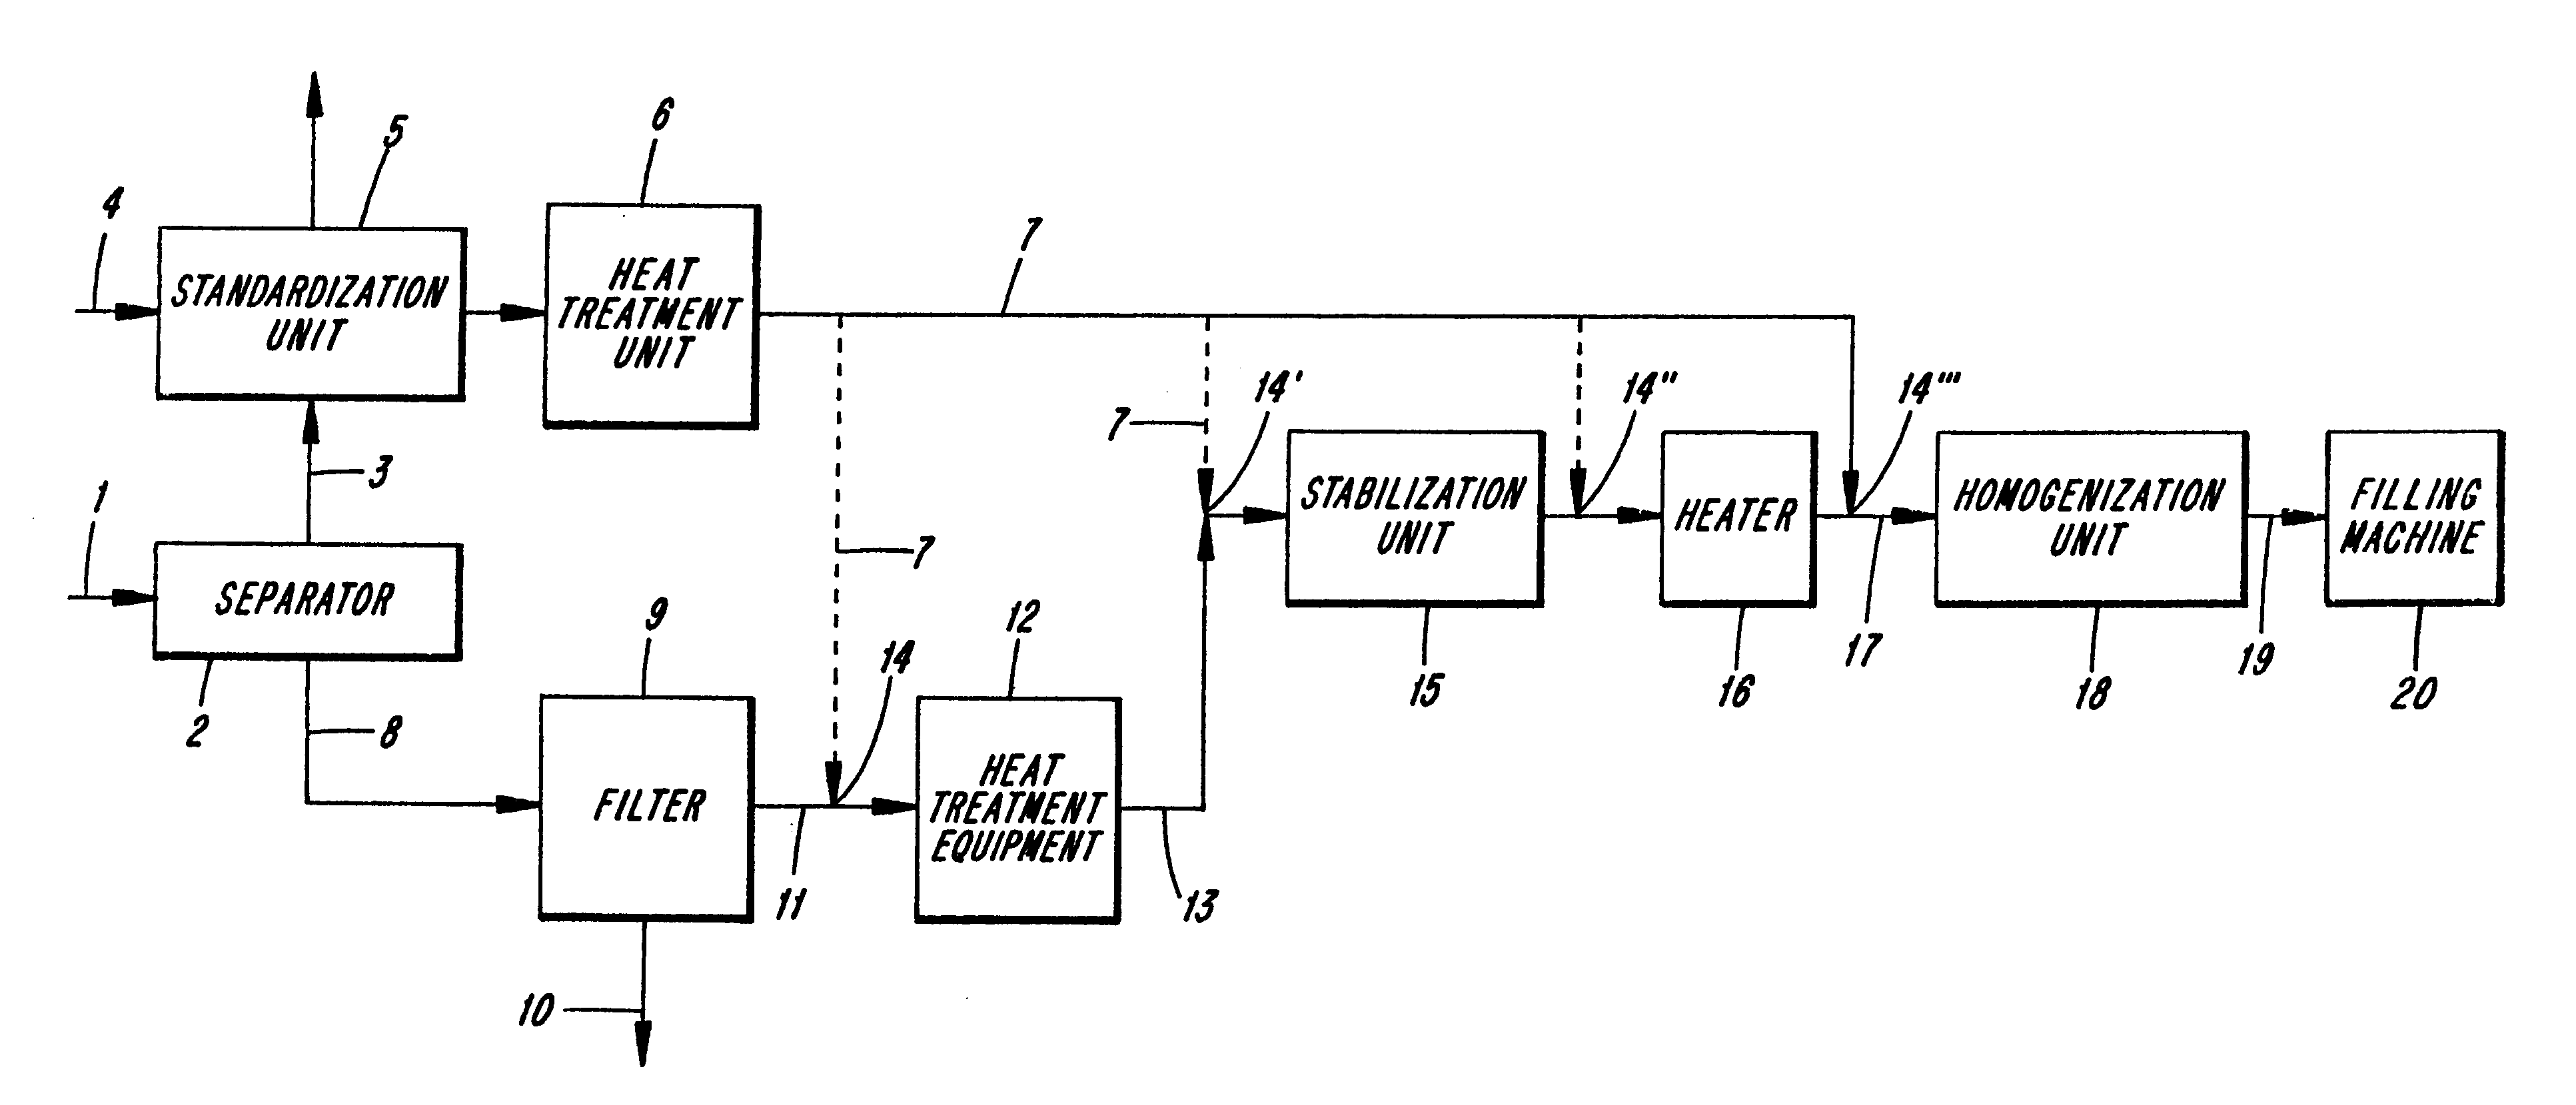 Method for producing sterile, stable milk